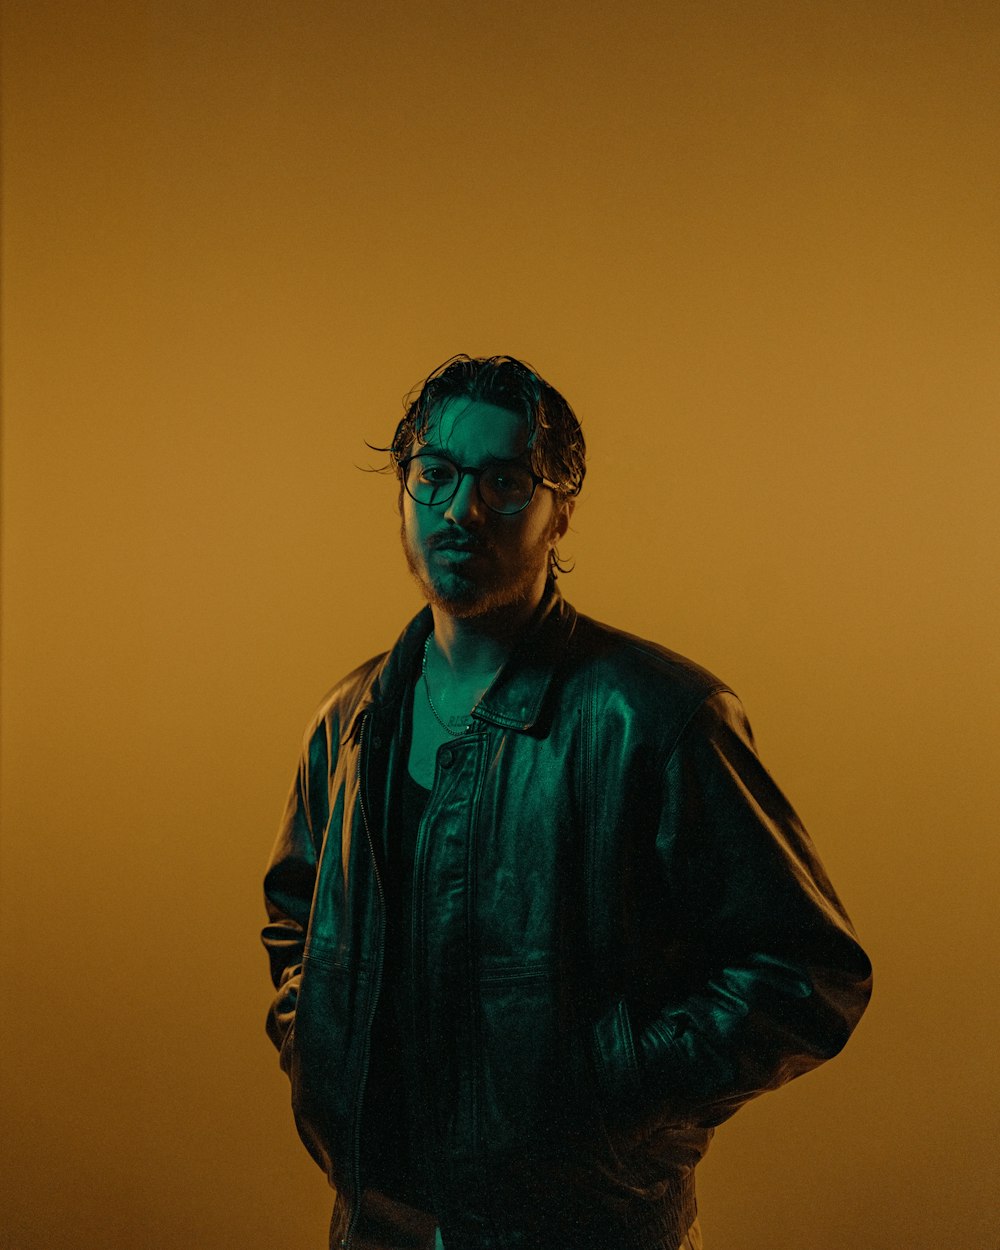 a man in a leather jacket standing in front of a yellow background